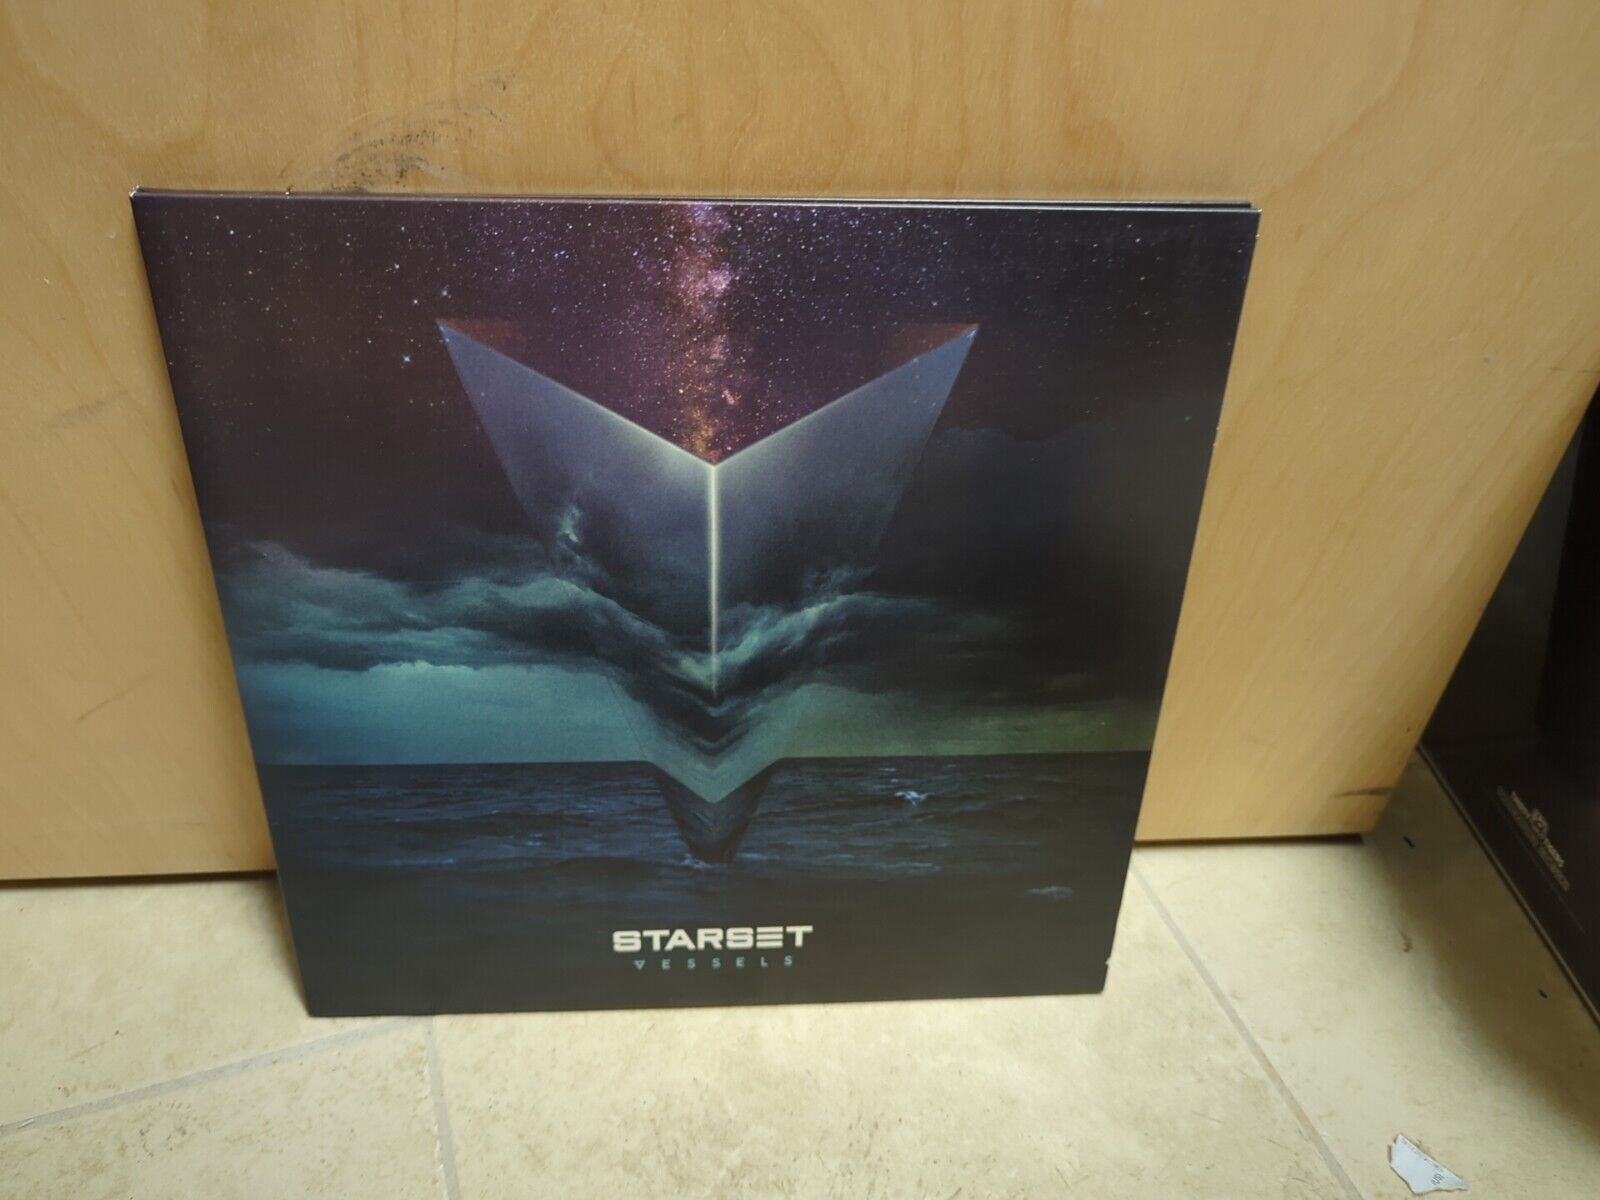 Vessels by Starset (Record, 2017)